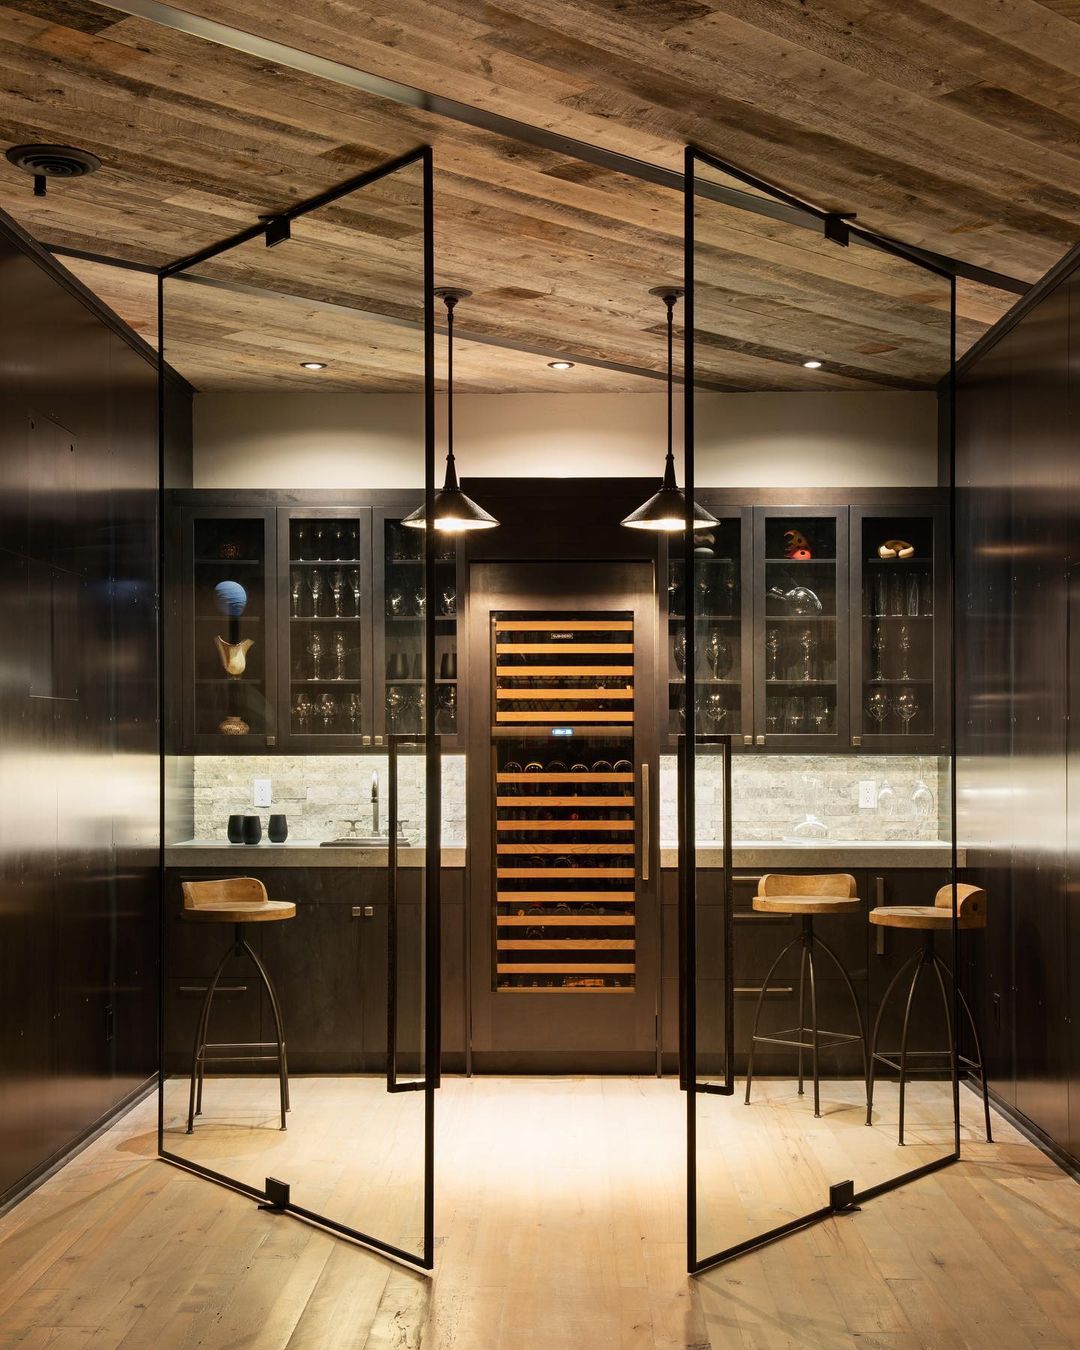 Basement Wine Bar with Spinning Glass Doors. Photo by Instagram user @wkphotography